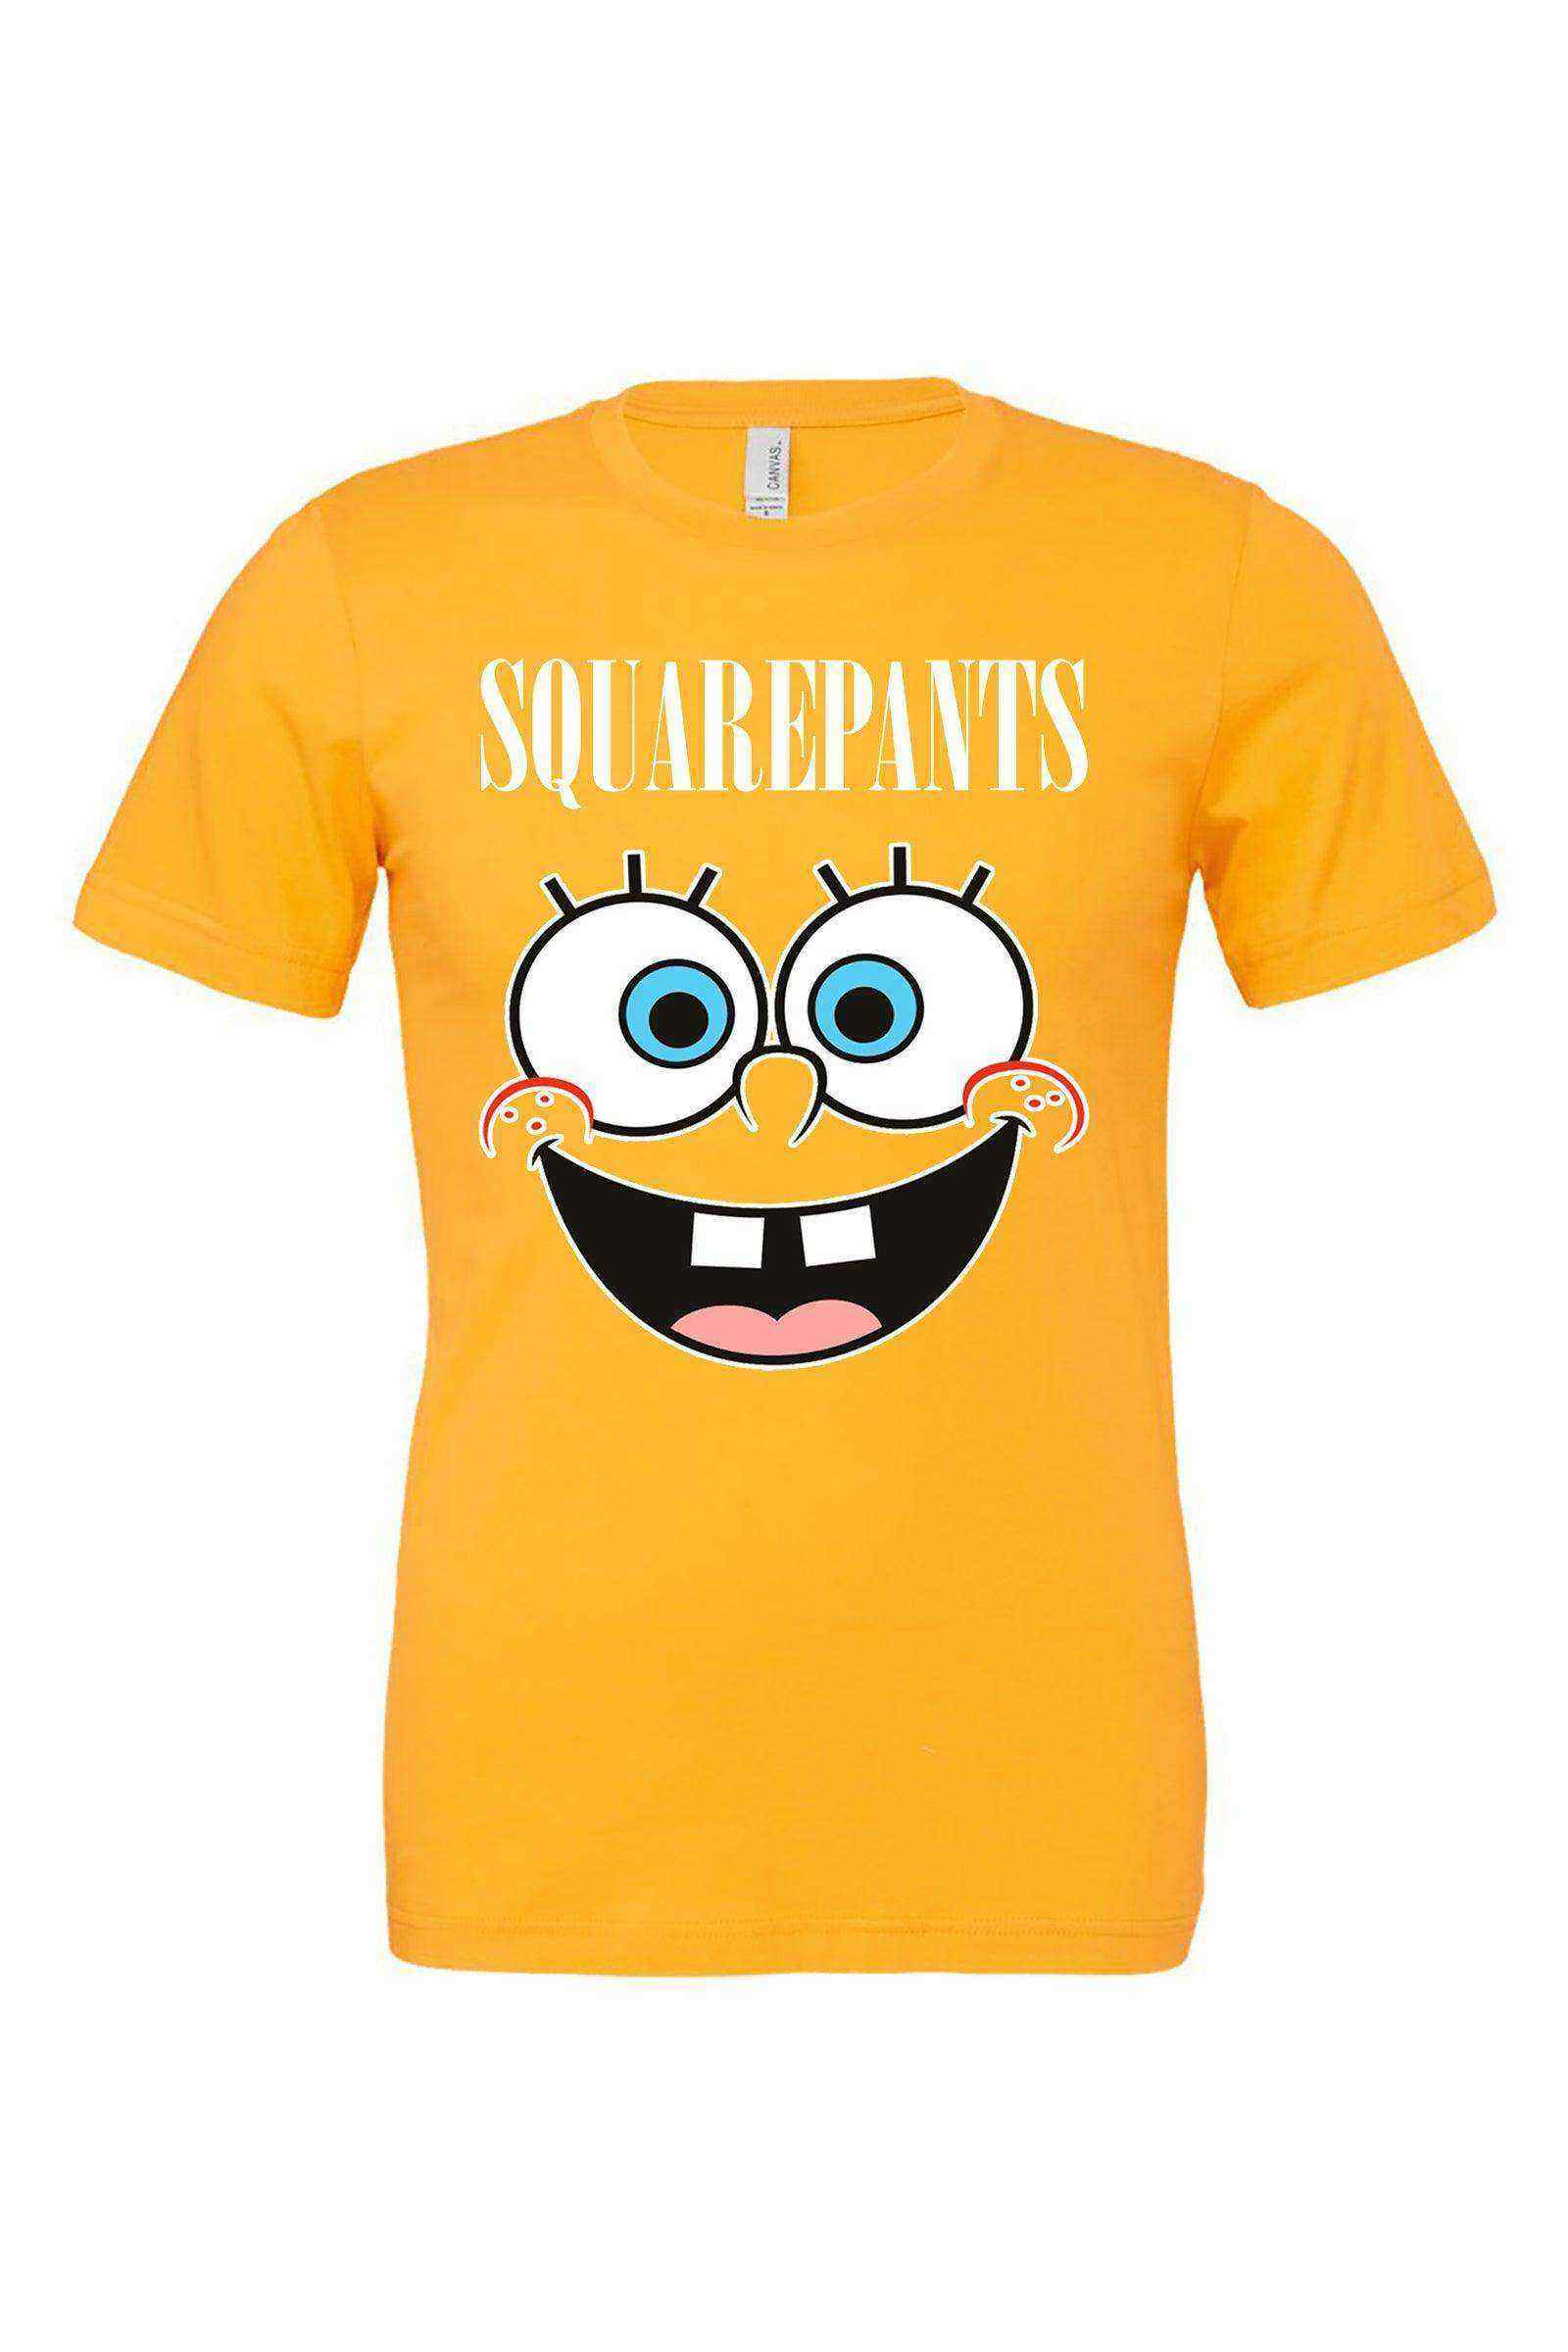 Youth | Squarepants Band Tee | Pineapple Under The Sea Shirt - Dylan's Tees